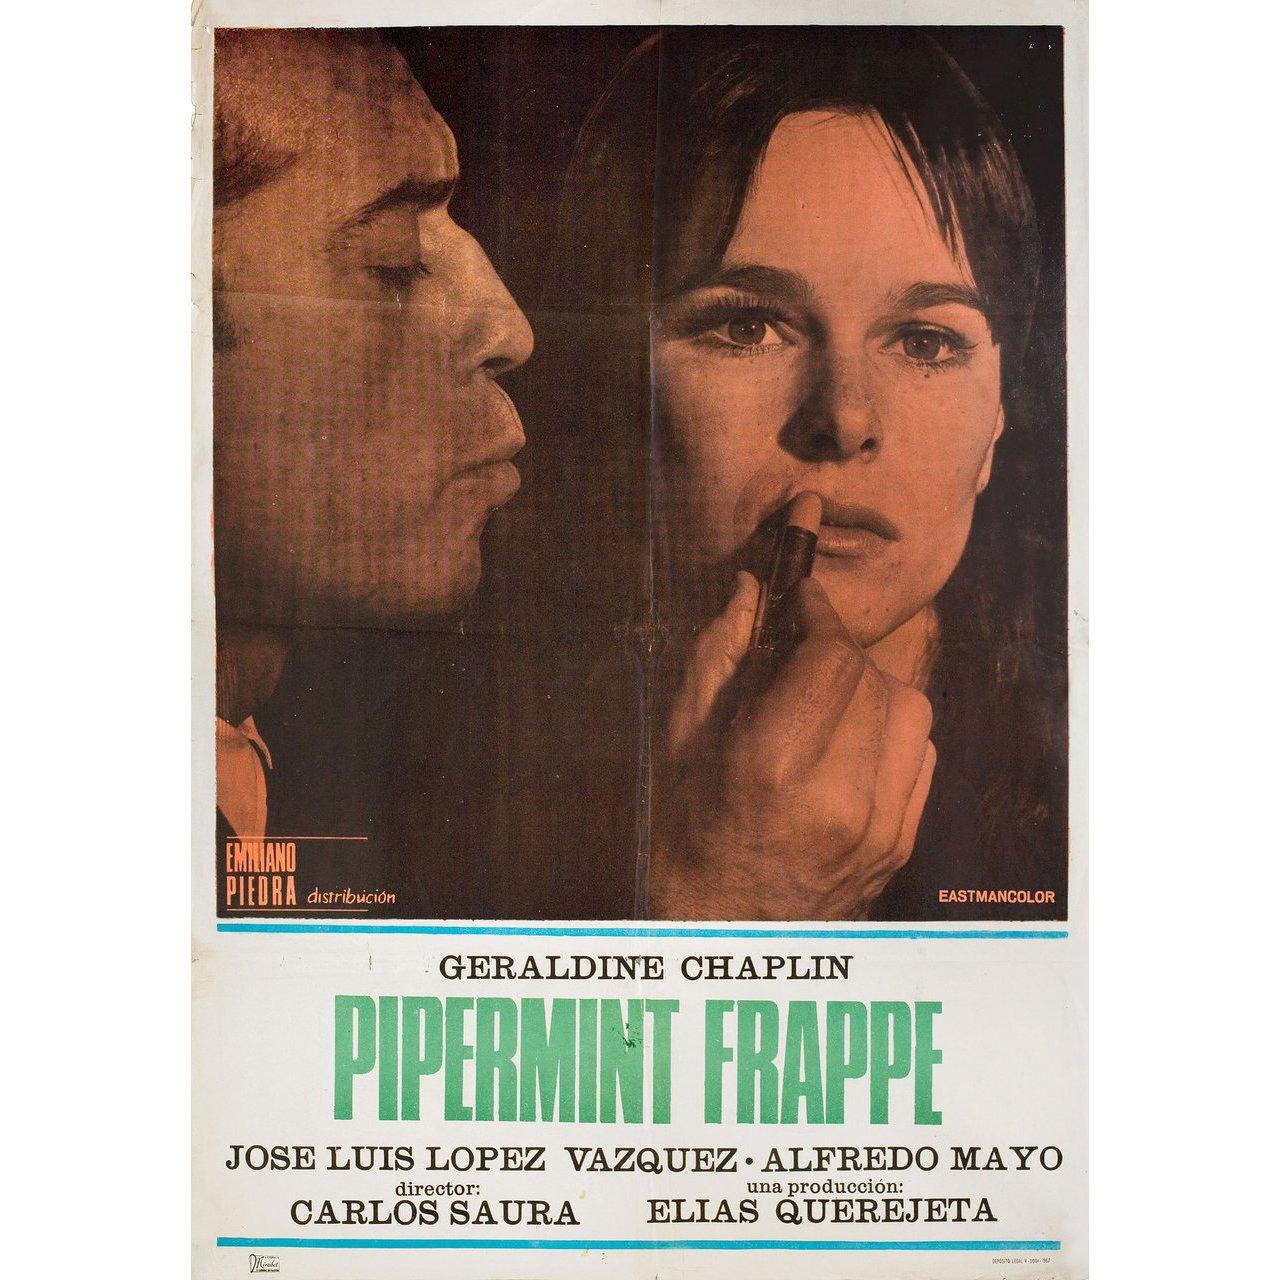 Original 1967 Spanish B1 poster for the film Peppermint Frappe directed by Carlos Saura with Geraldine Chaplin / Jose Luis Lopez Vazquez / Alfredo Mayo. Very Good condition, folded with edge wear. Many original posters were issued folded or were